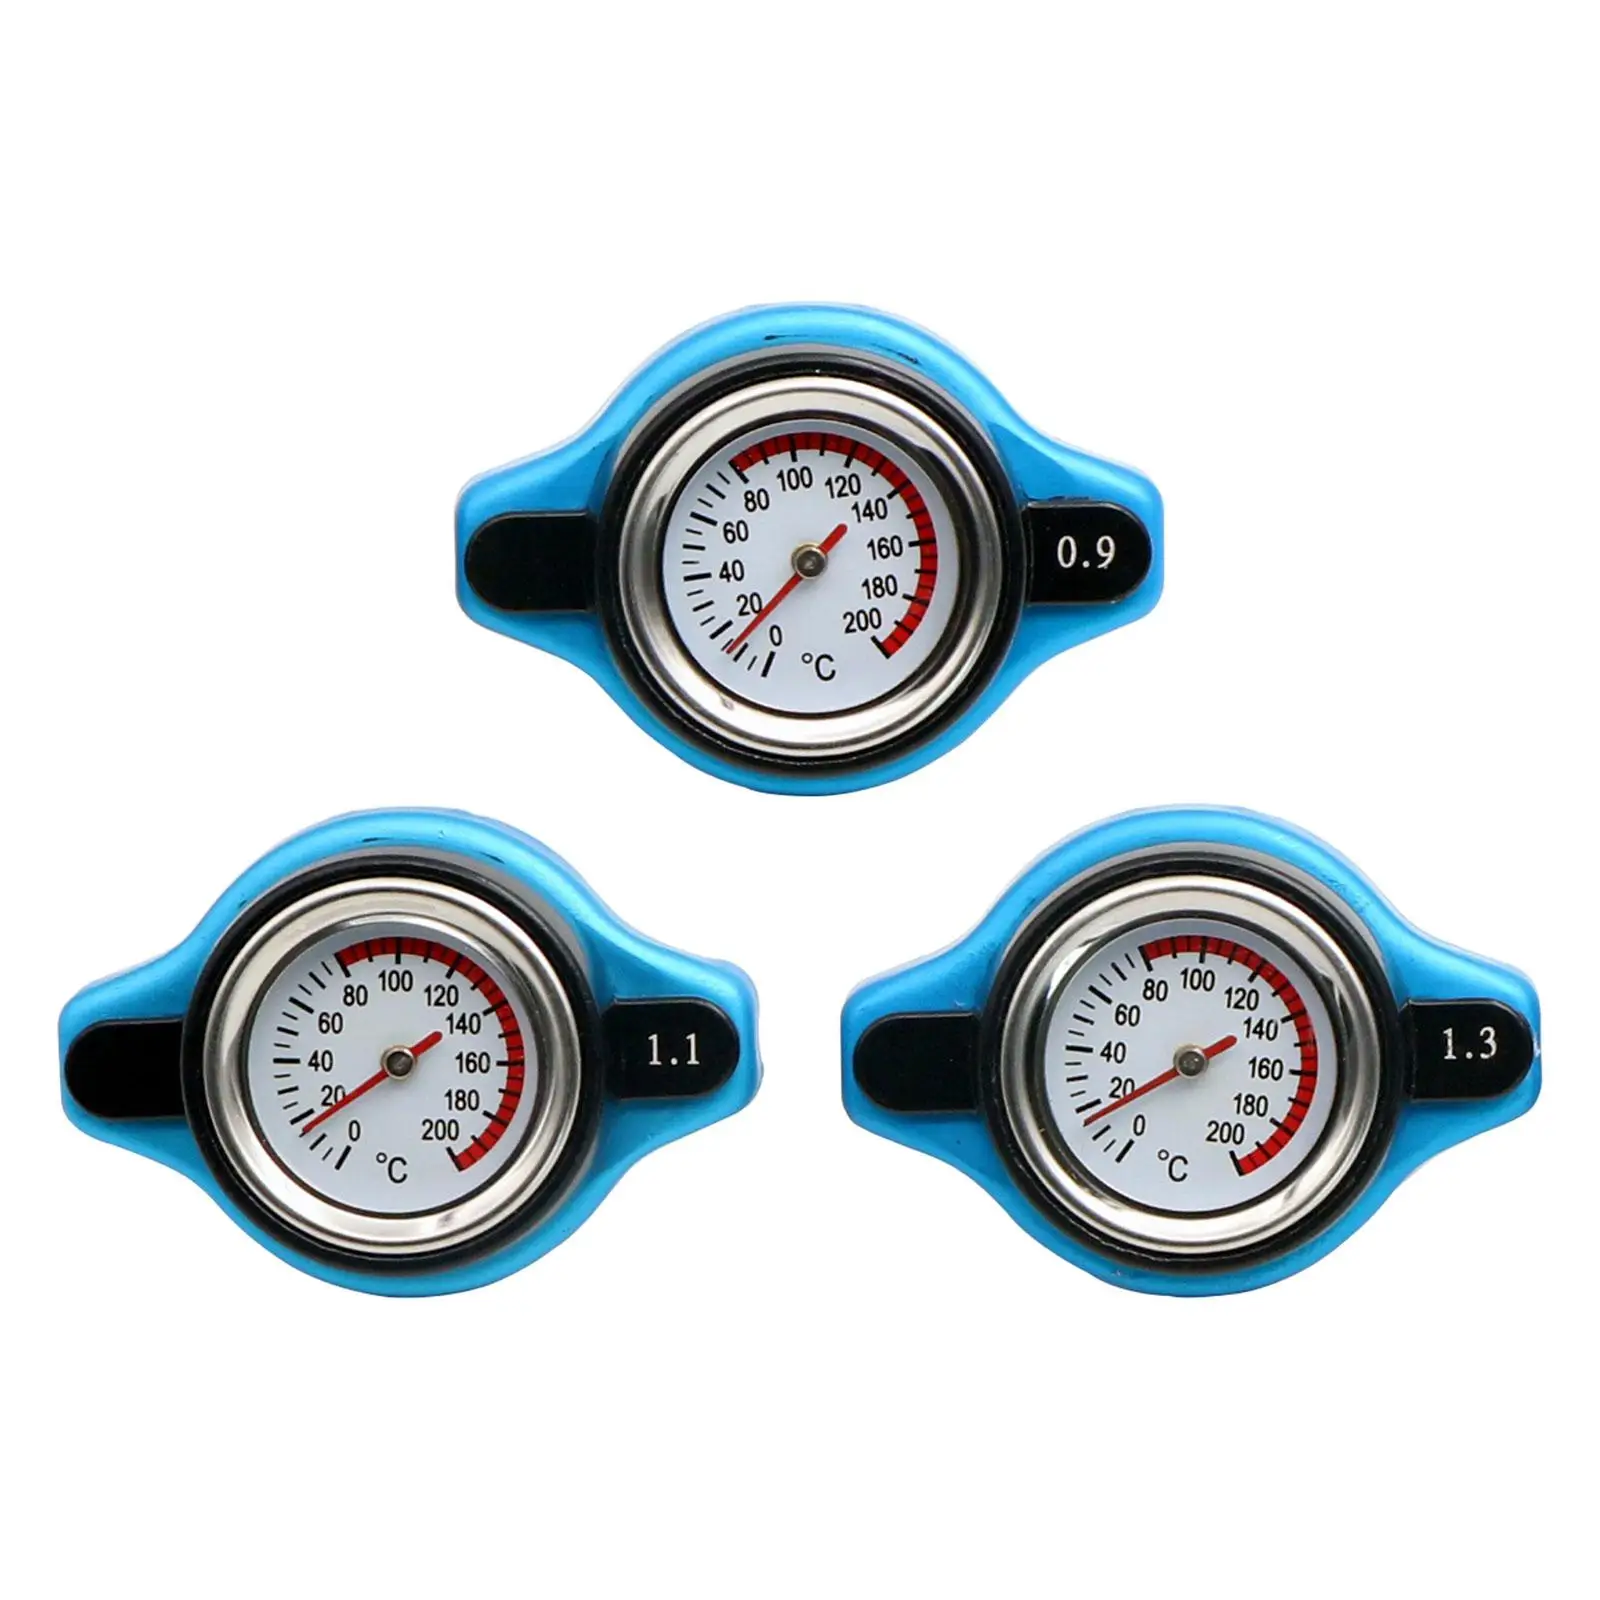 Thermostatic Radiator Cap Temp Gauge Easy Installation Sturdy Automotive Accessories High Quality Professional Replacement Parts